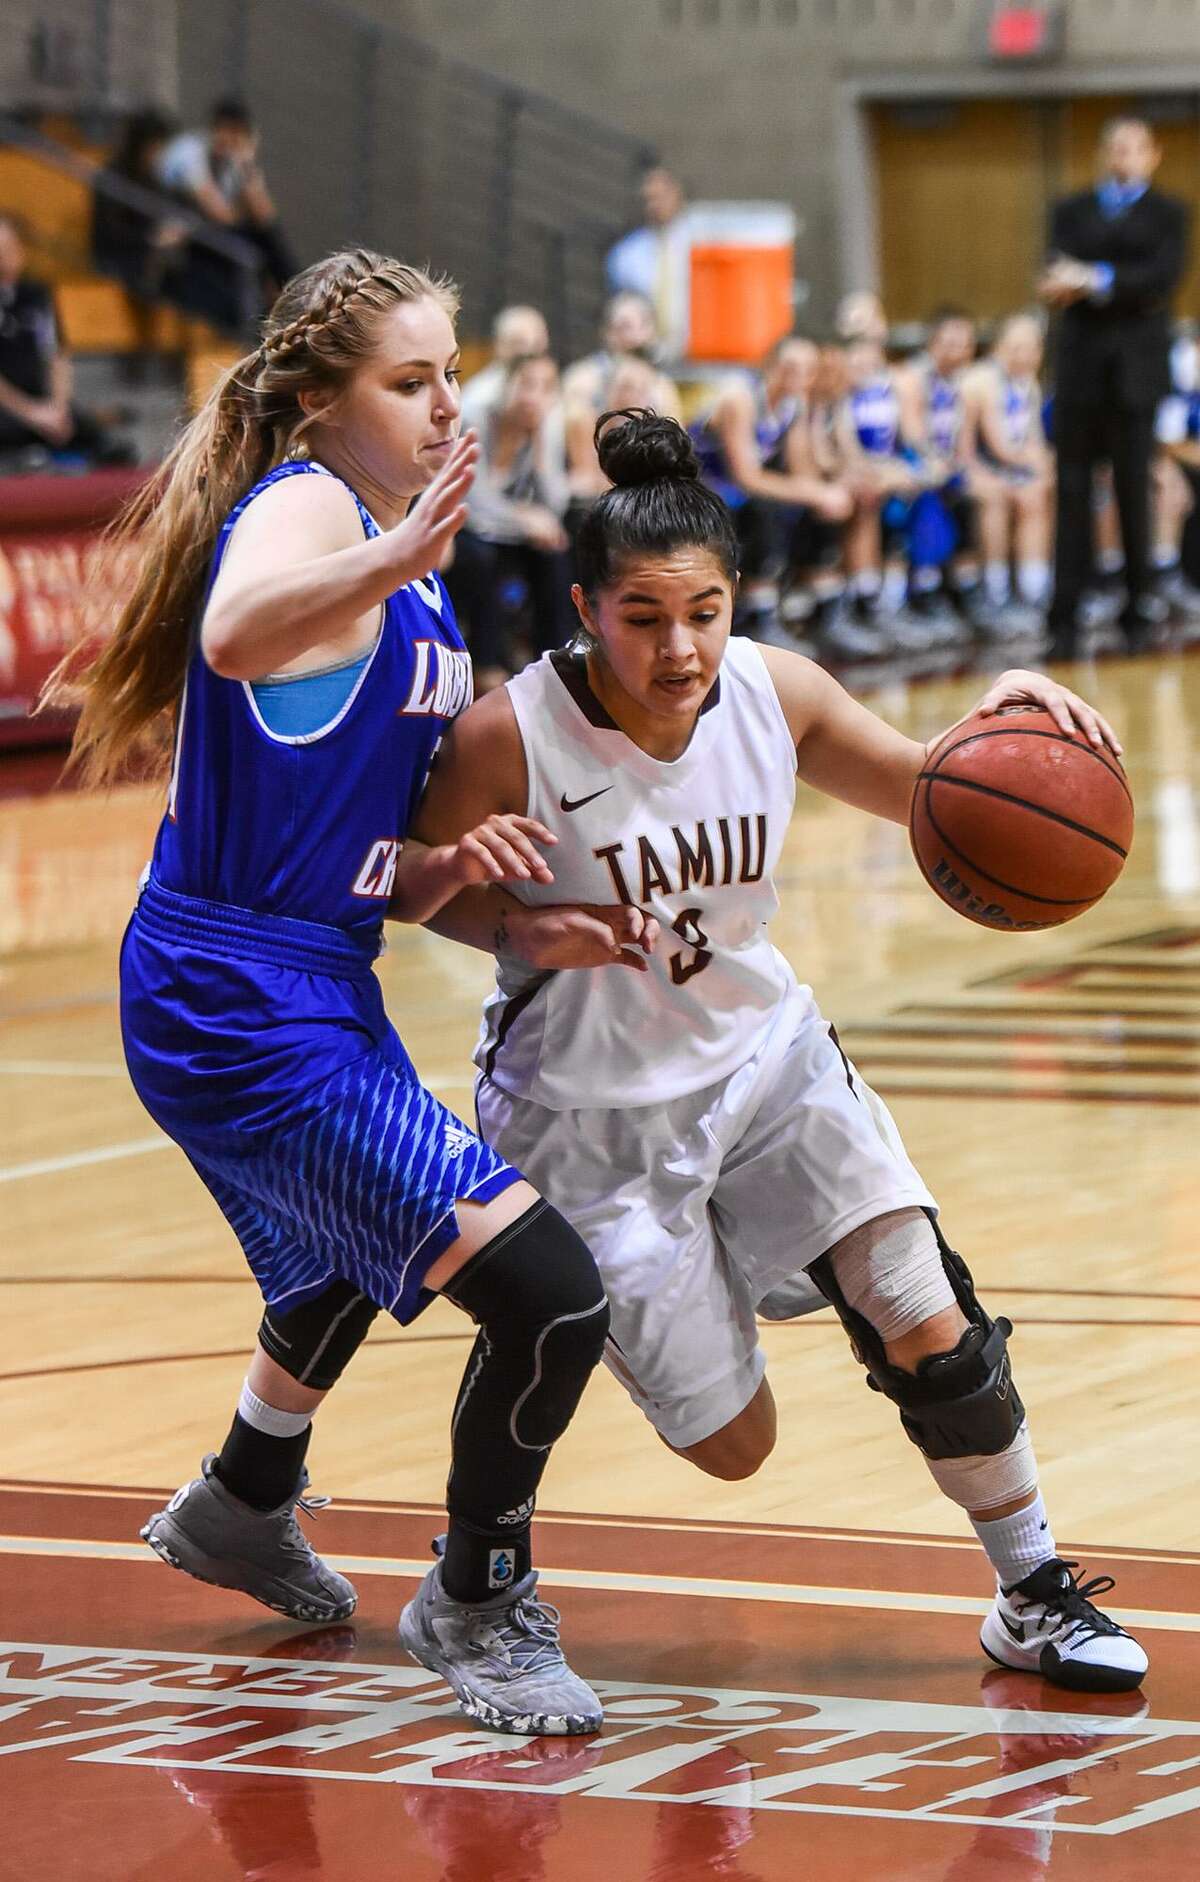 Joanna Perez scored 16 points in TAMIU’s 72-53 loss to Lubbock Christian in the first round.